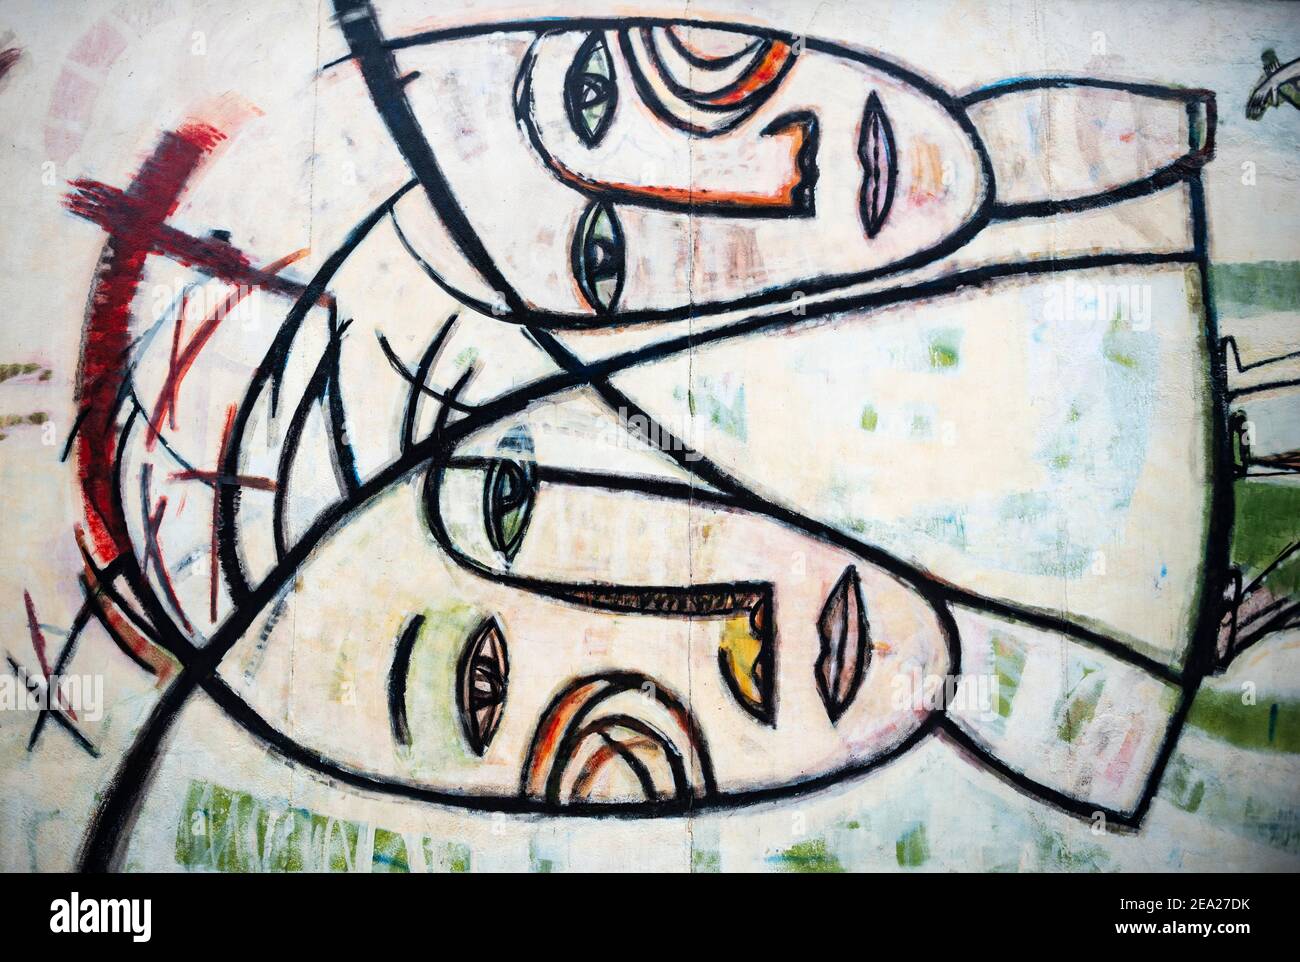 Graffiti Joint Venture with two faces, artist Margaret Hunter, East Side Gallery, Mauergalerie, Berlin, Germany Stock Photo